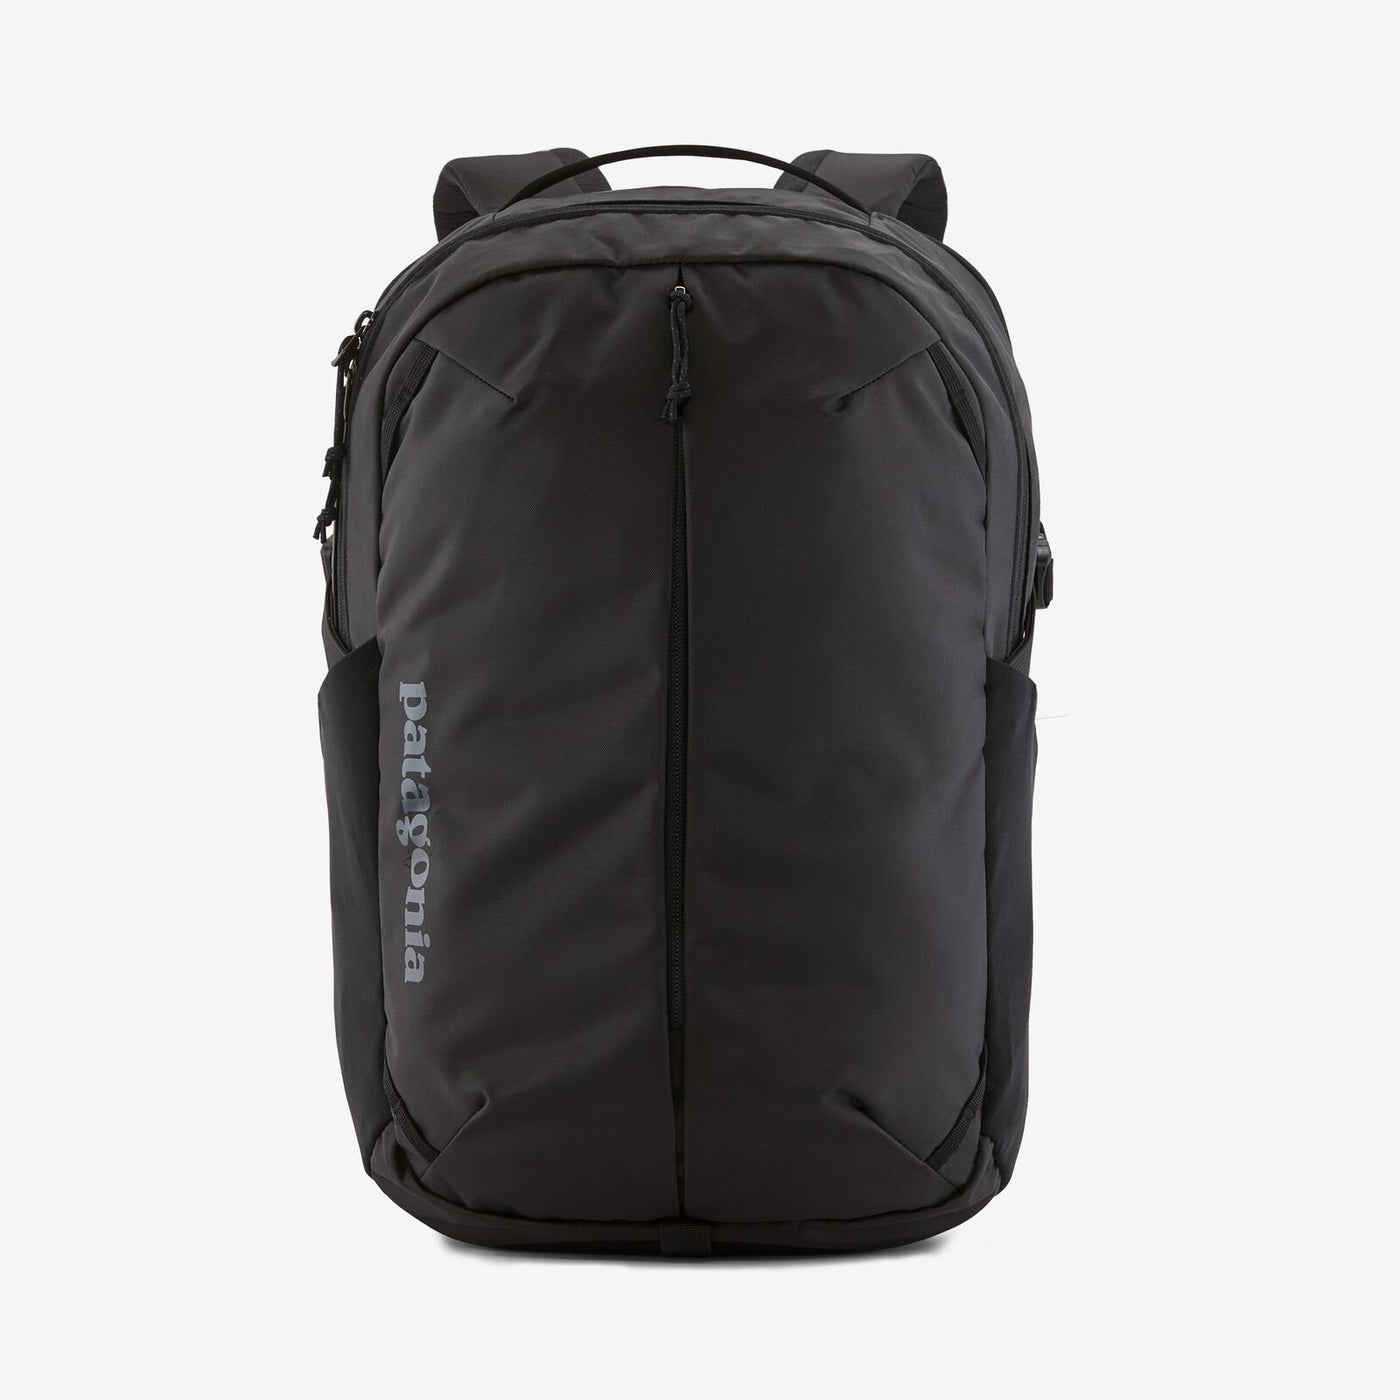 Patagonia Refugio Backpack 26L-Luggage-Black-One Size-Kevin's Fine Outdoor Gear & Apparel